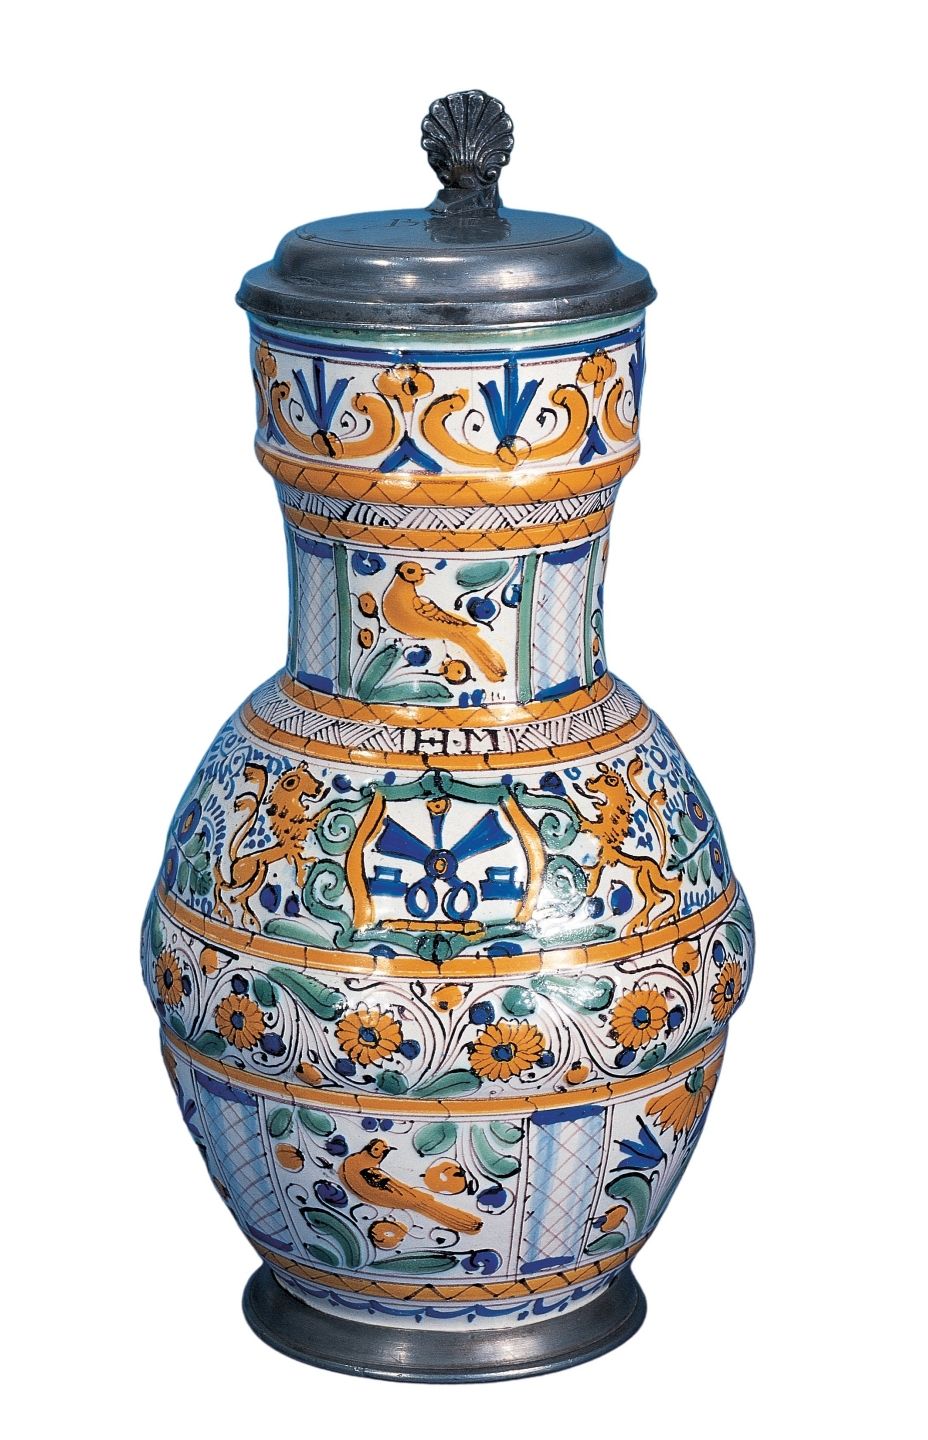 haban-faience-guild-jug-dated-1739-tailors